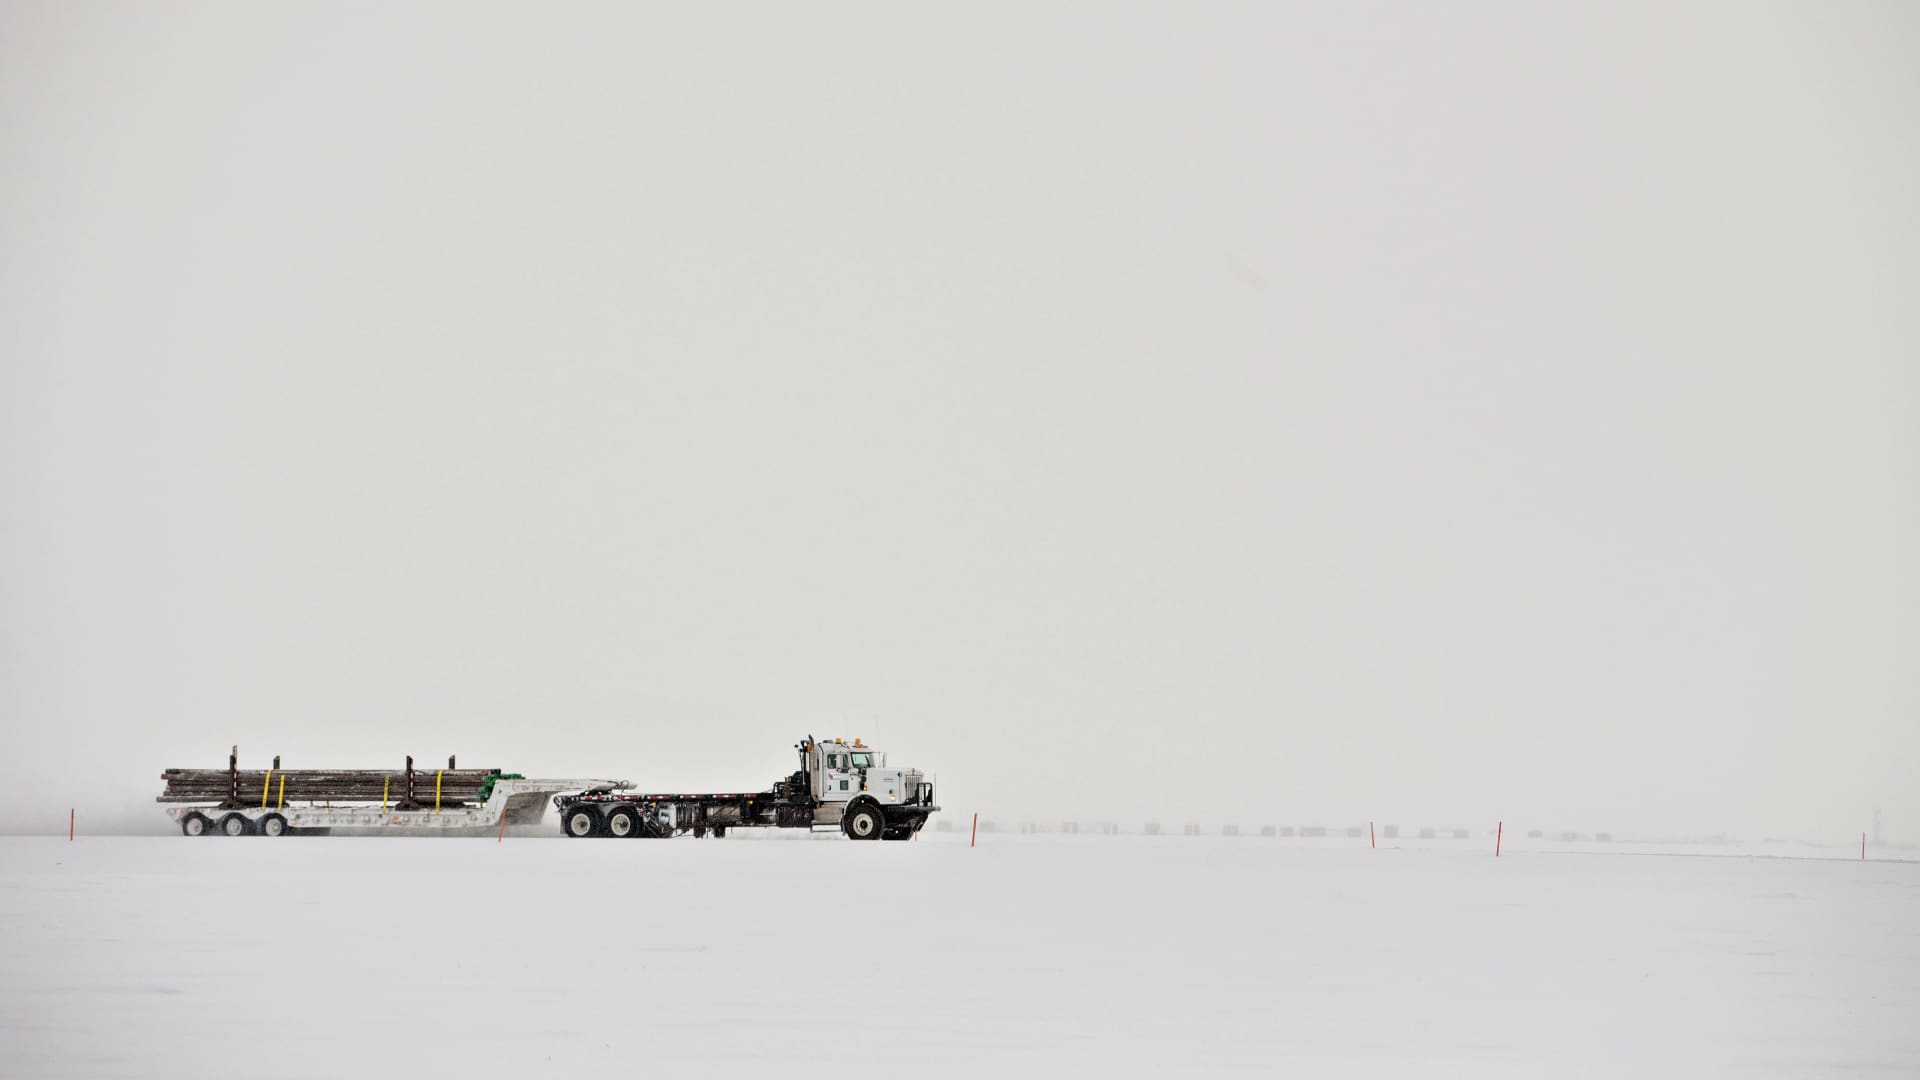 A truck carries a load of pipes along a snow covered road in Prudhoe Bay, Alaska, U.S., on Thursday, Feb. 16, 2017. 